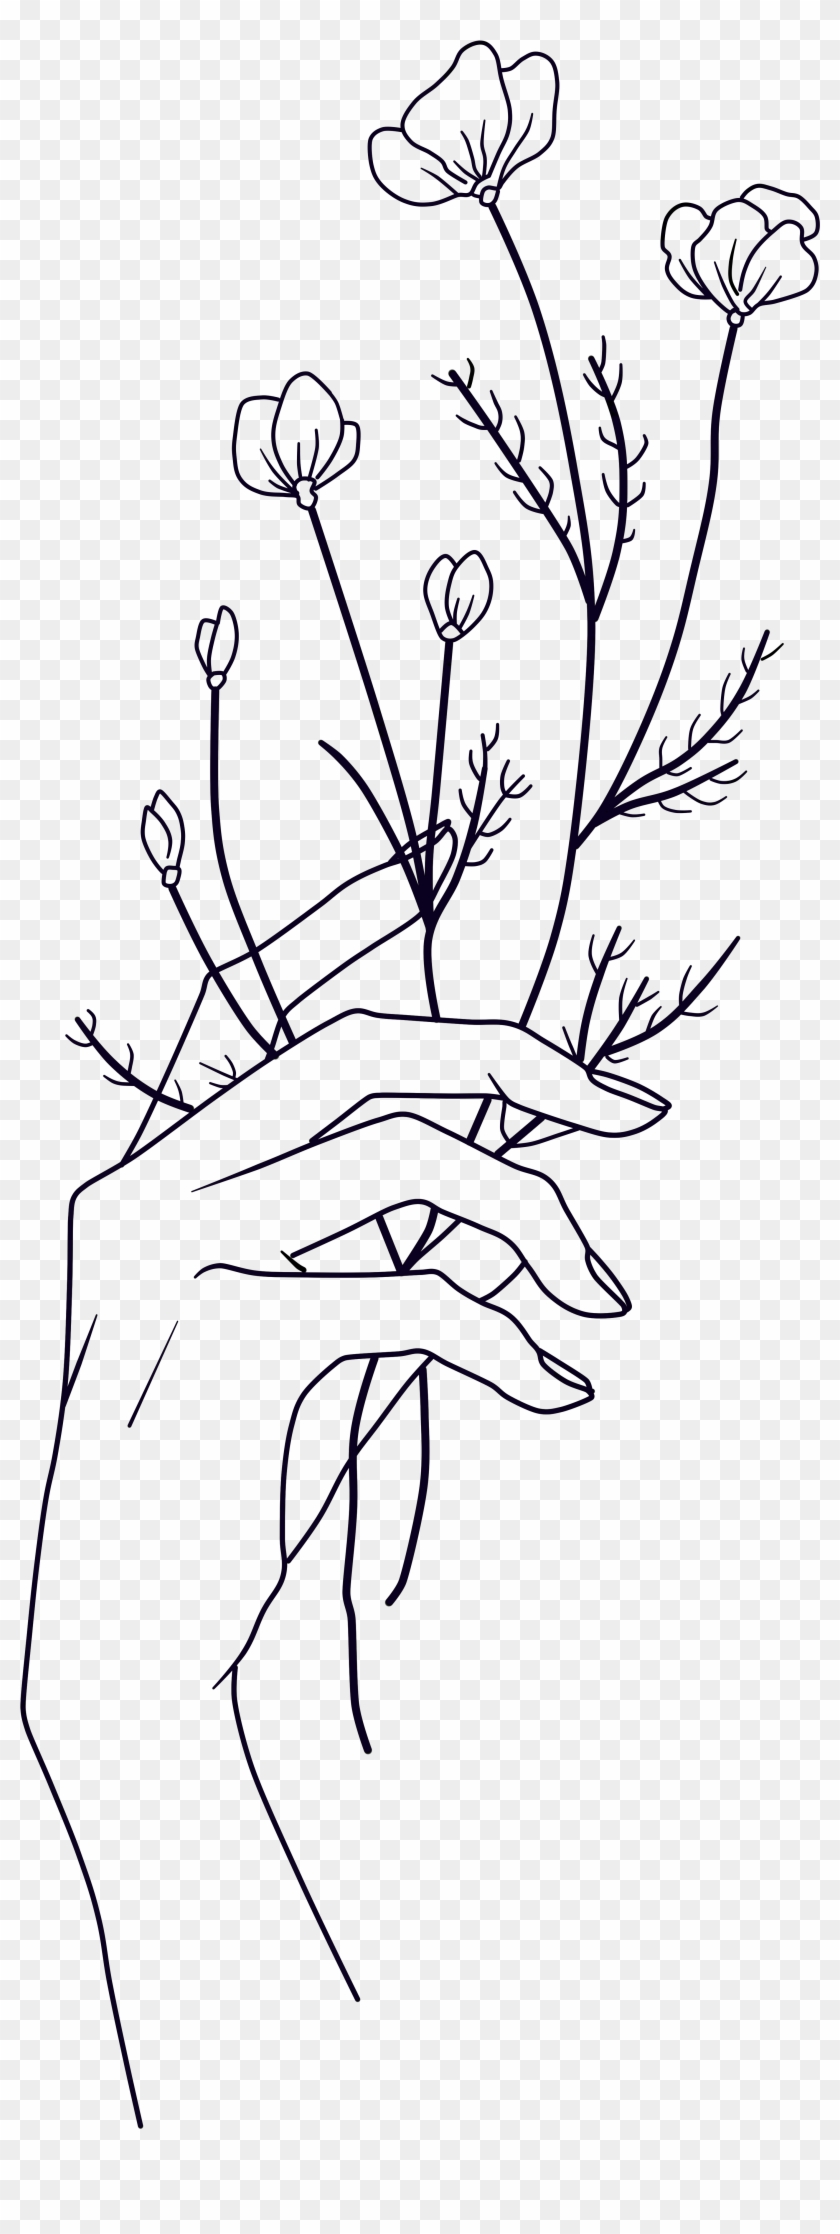 Hand Holding A Flower Drawing Clipart #2667835